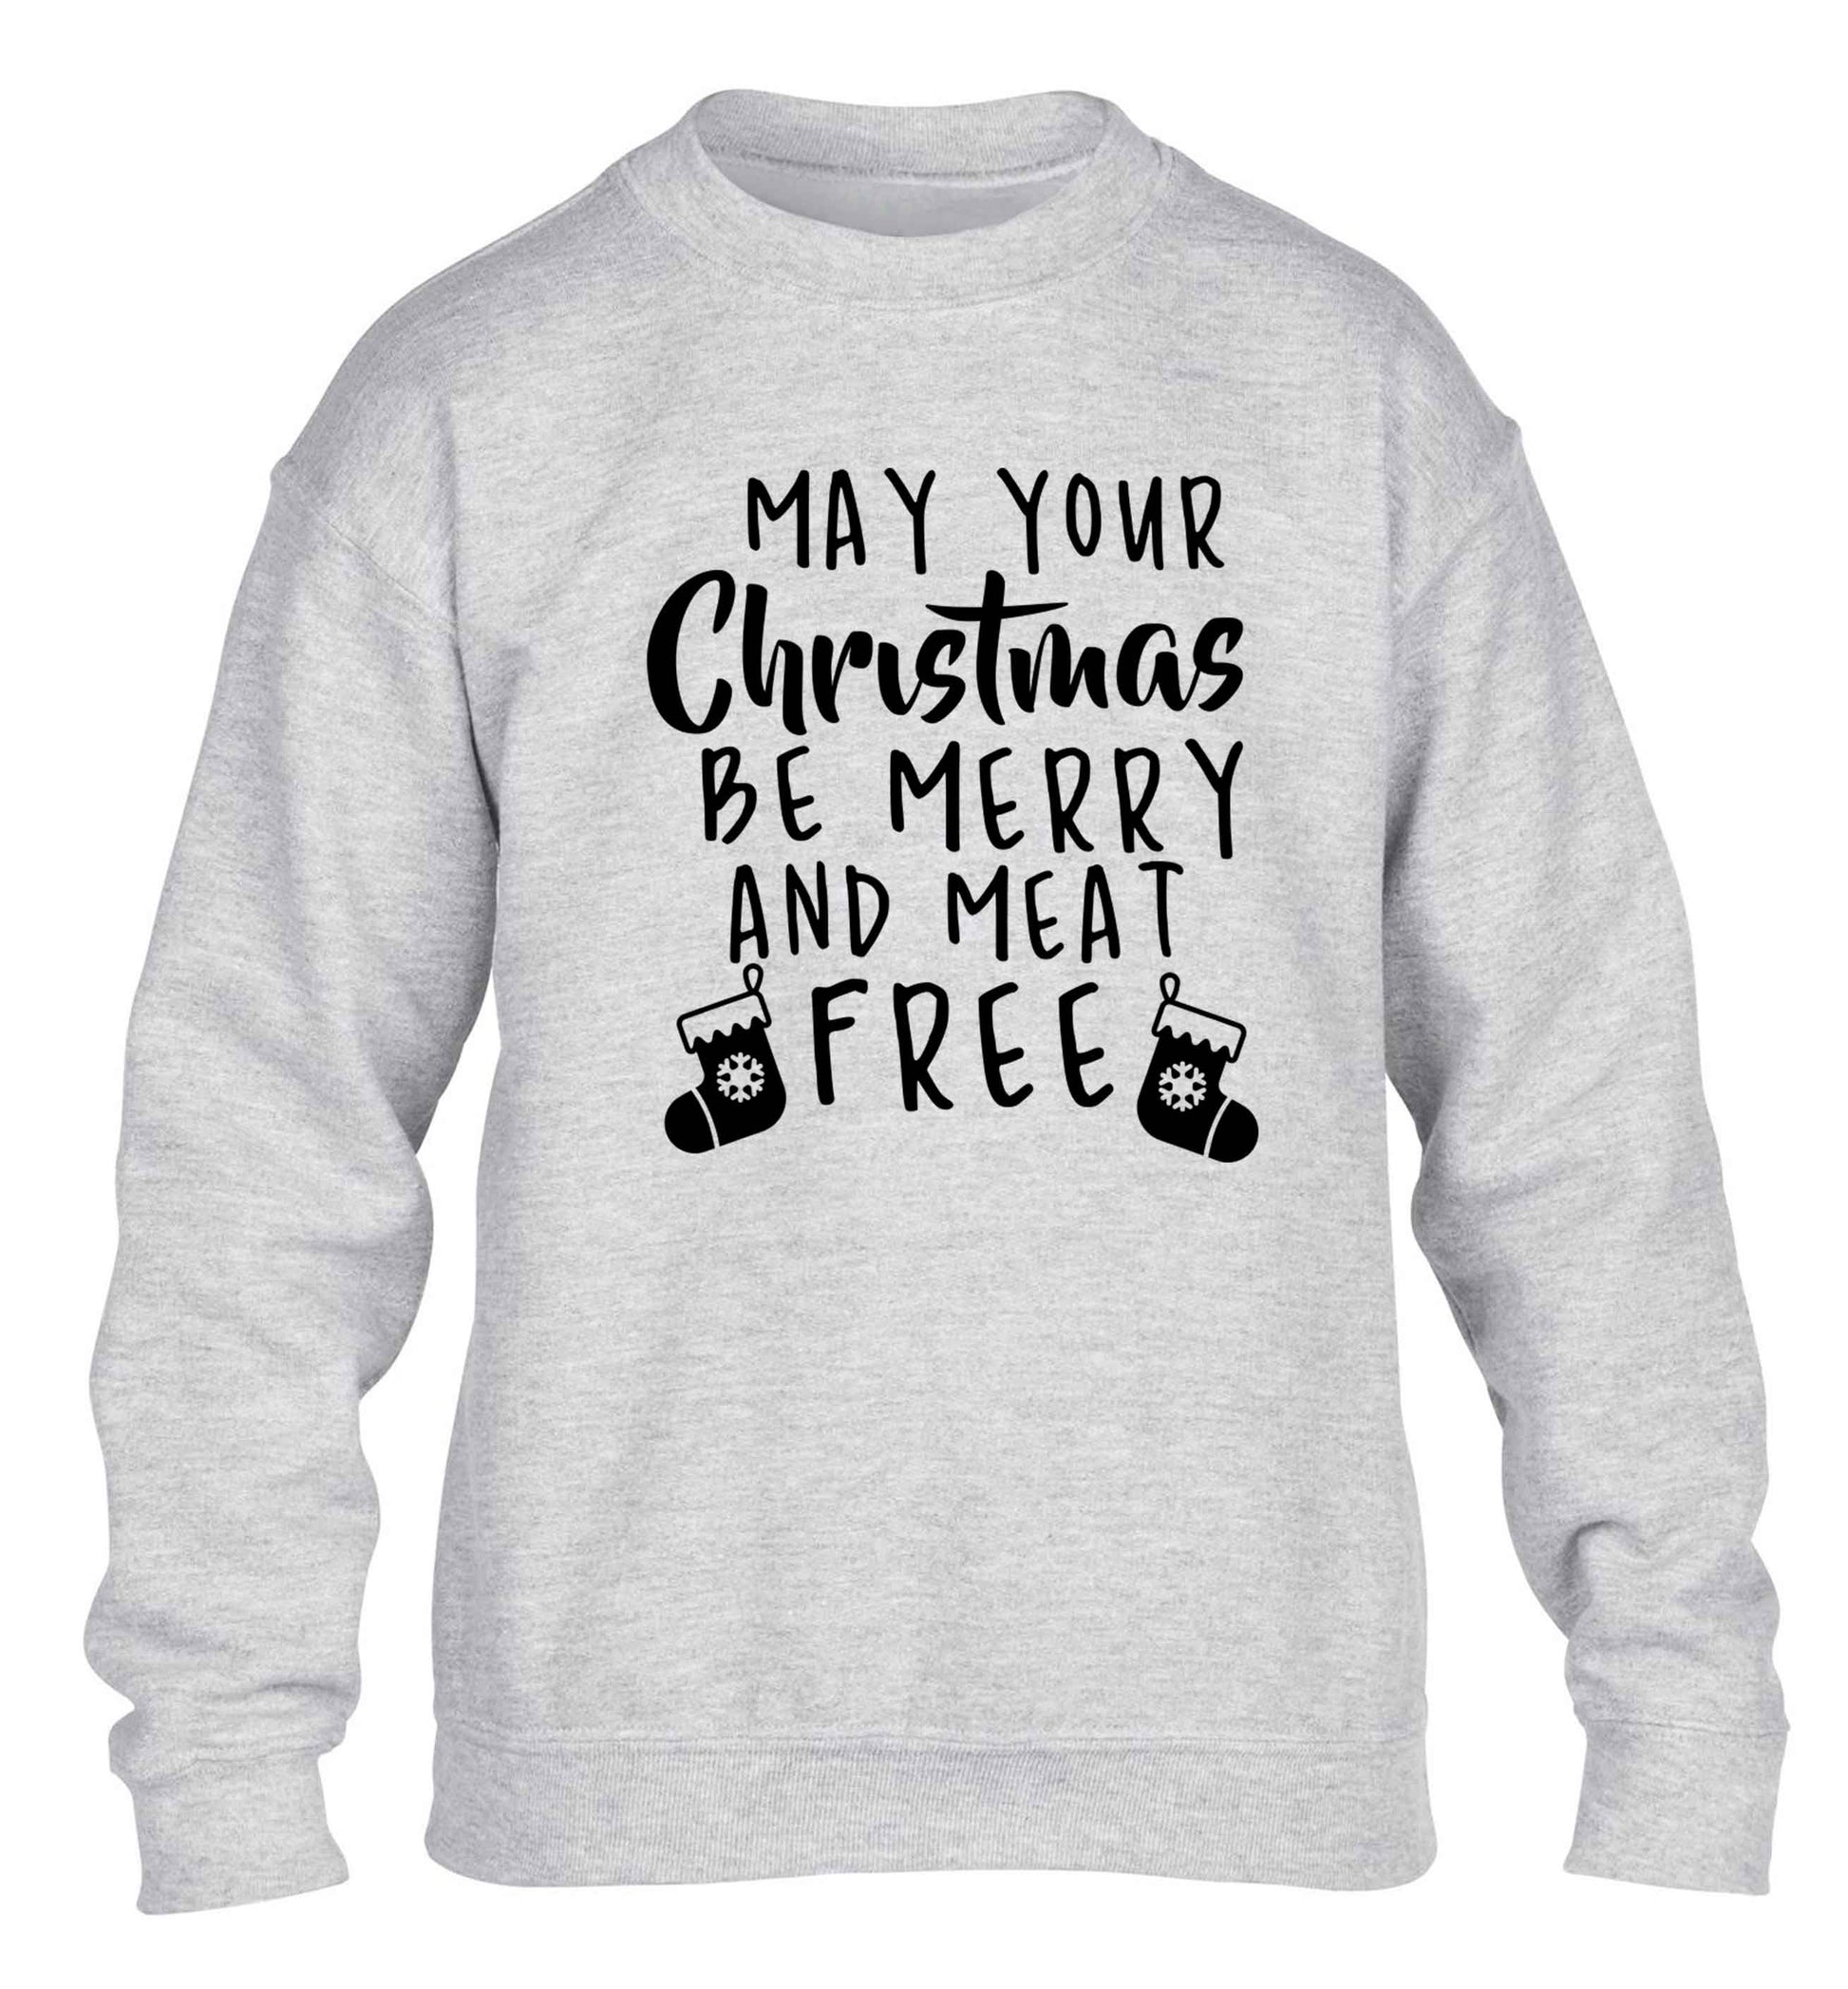 May your Christmas be merry and meat free children's grey sweater 12-13 Years